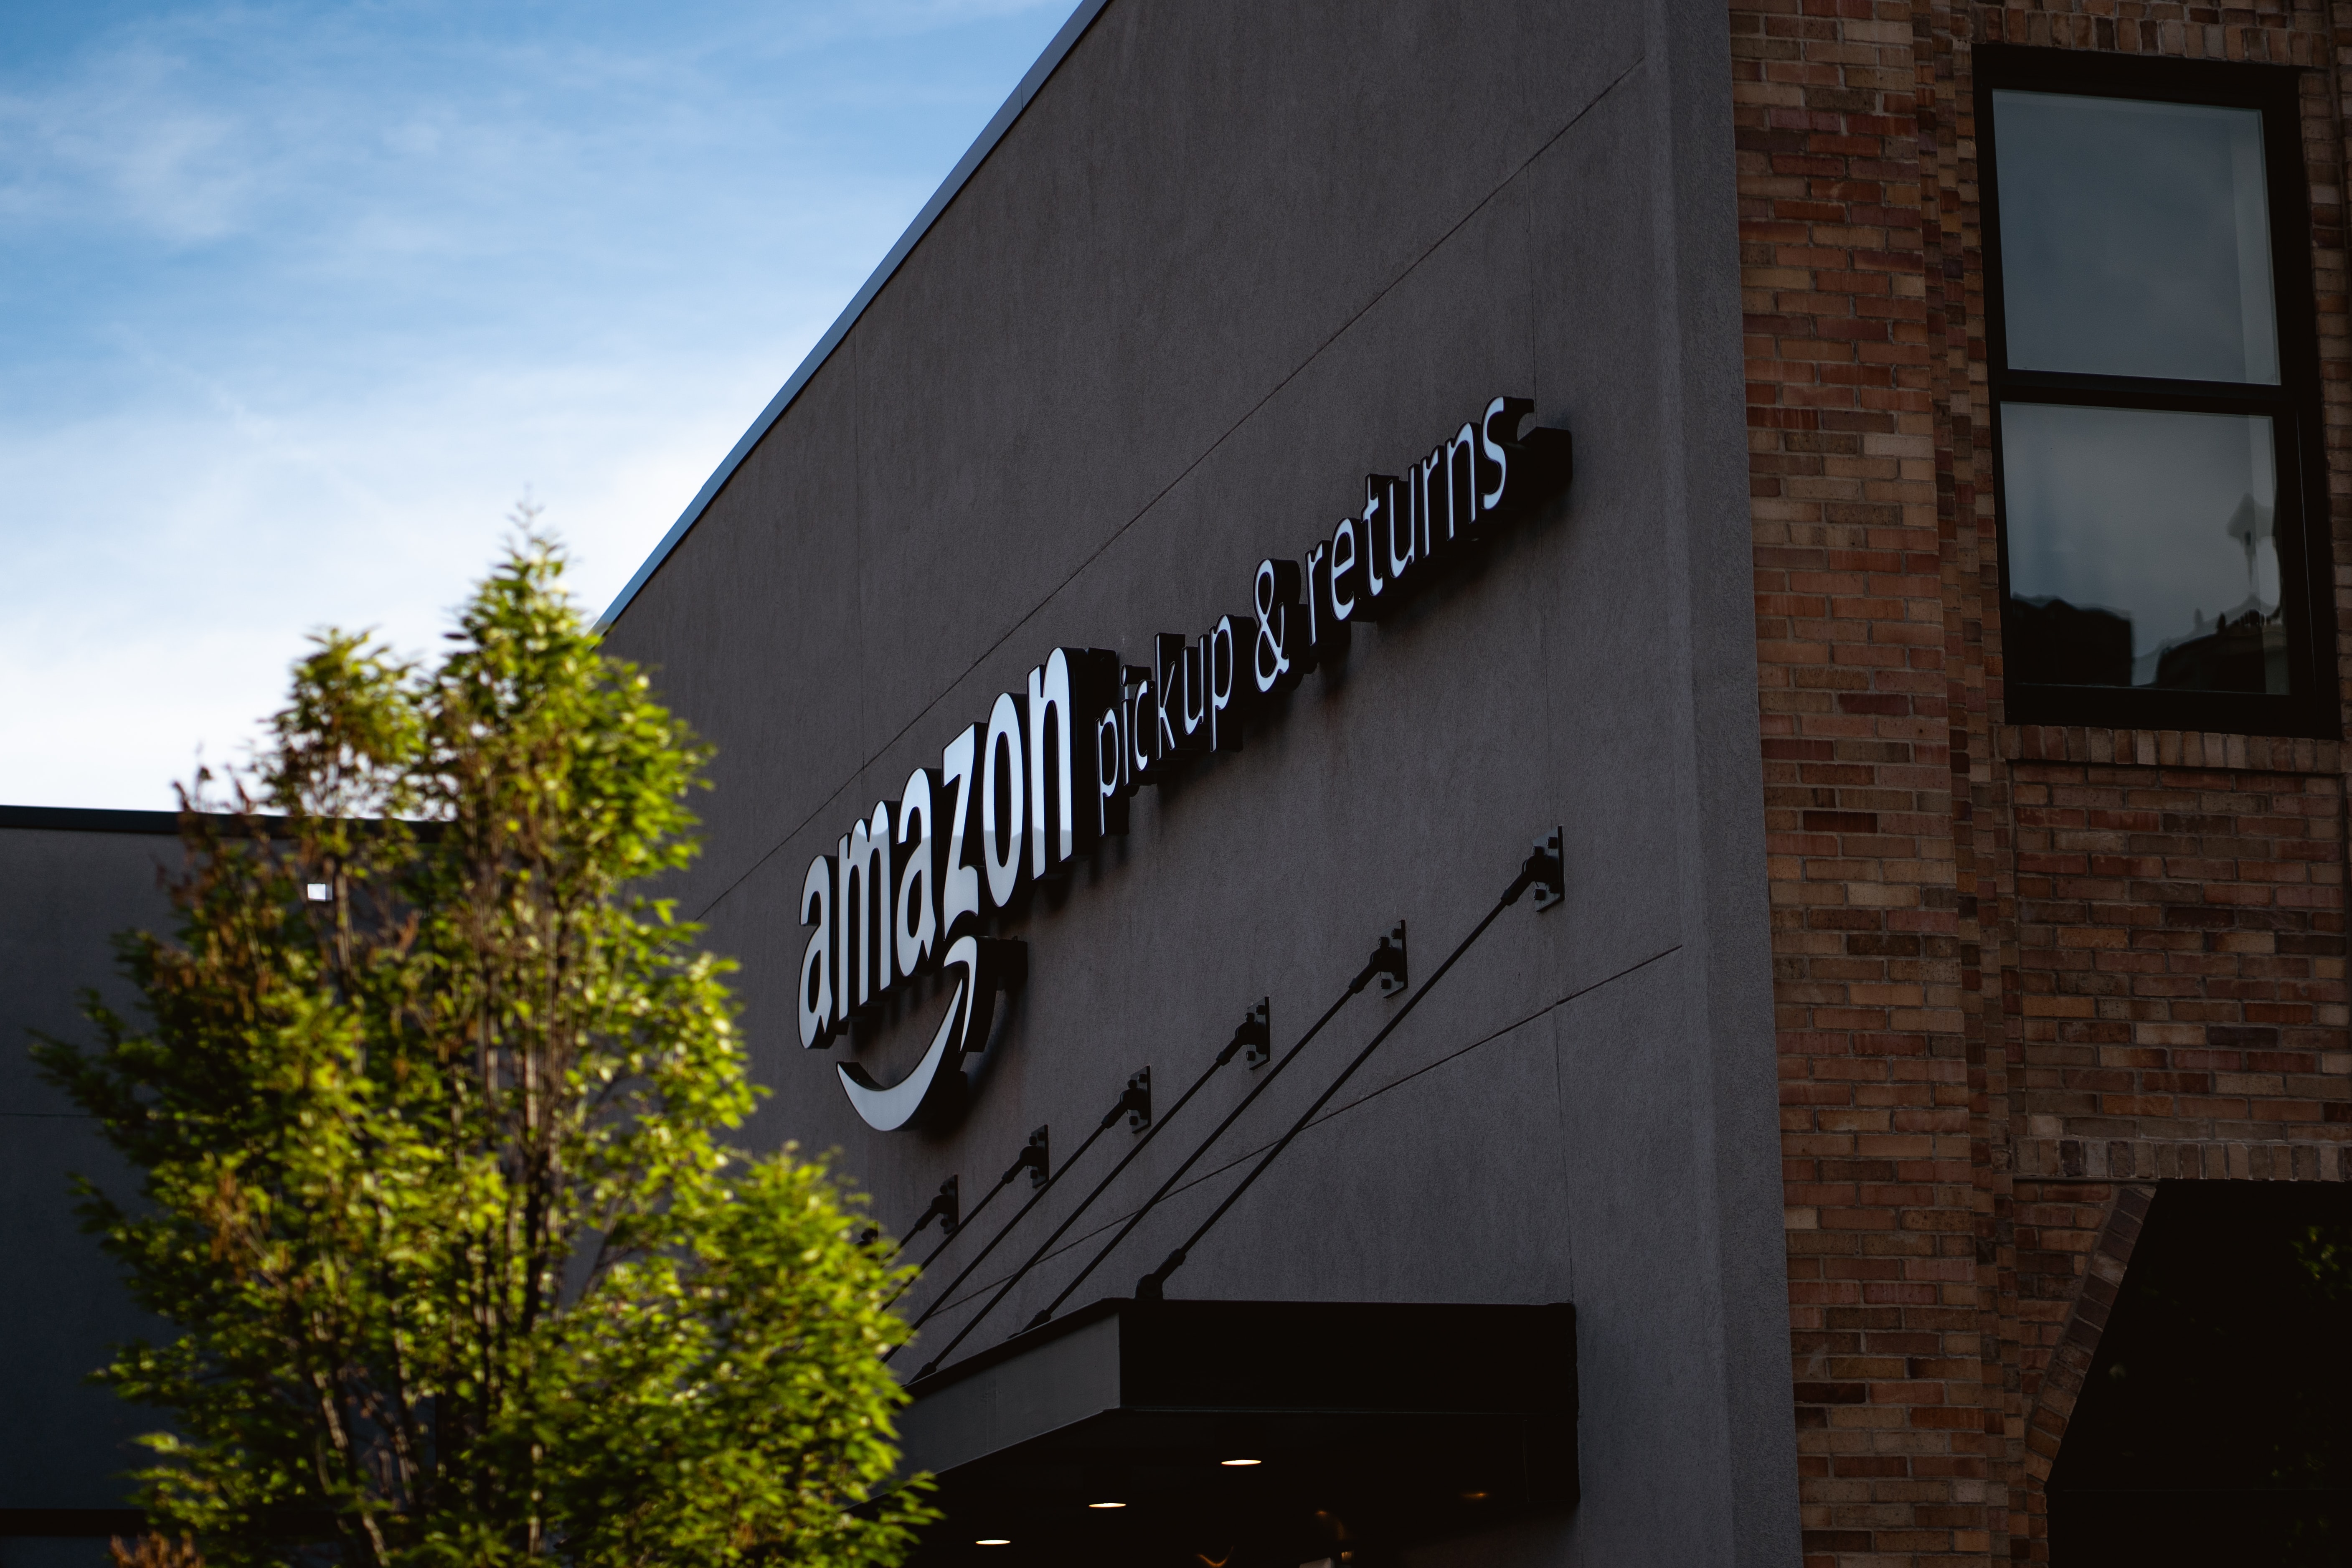 Investing in e-commerce? Here are the next Amazon companies to look into